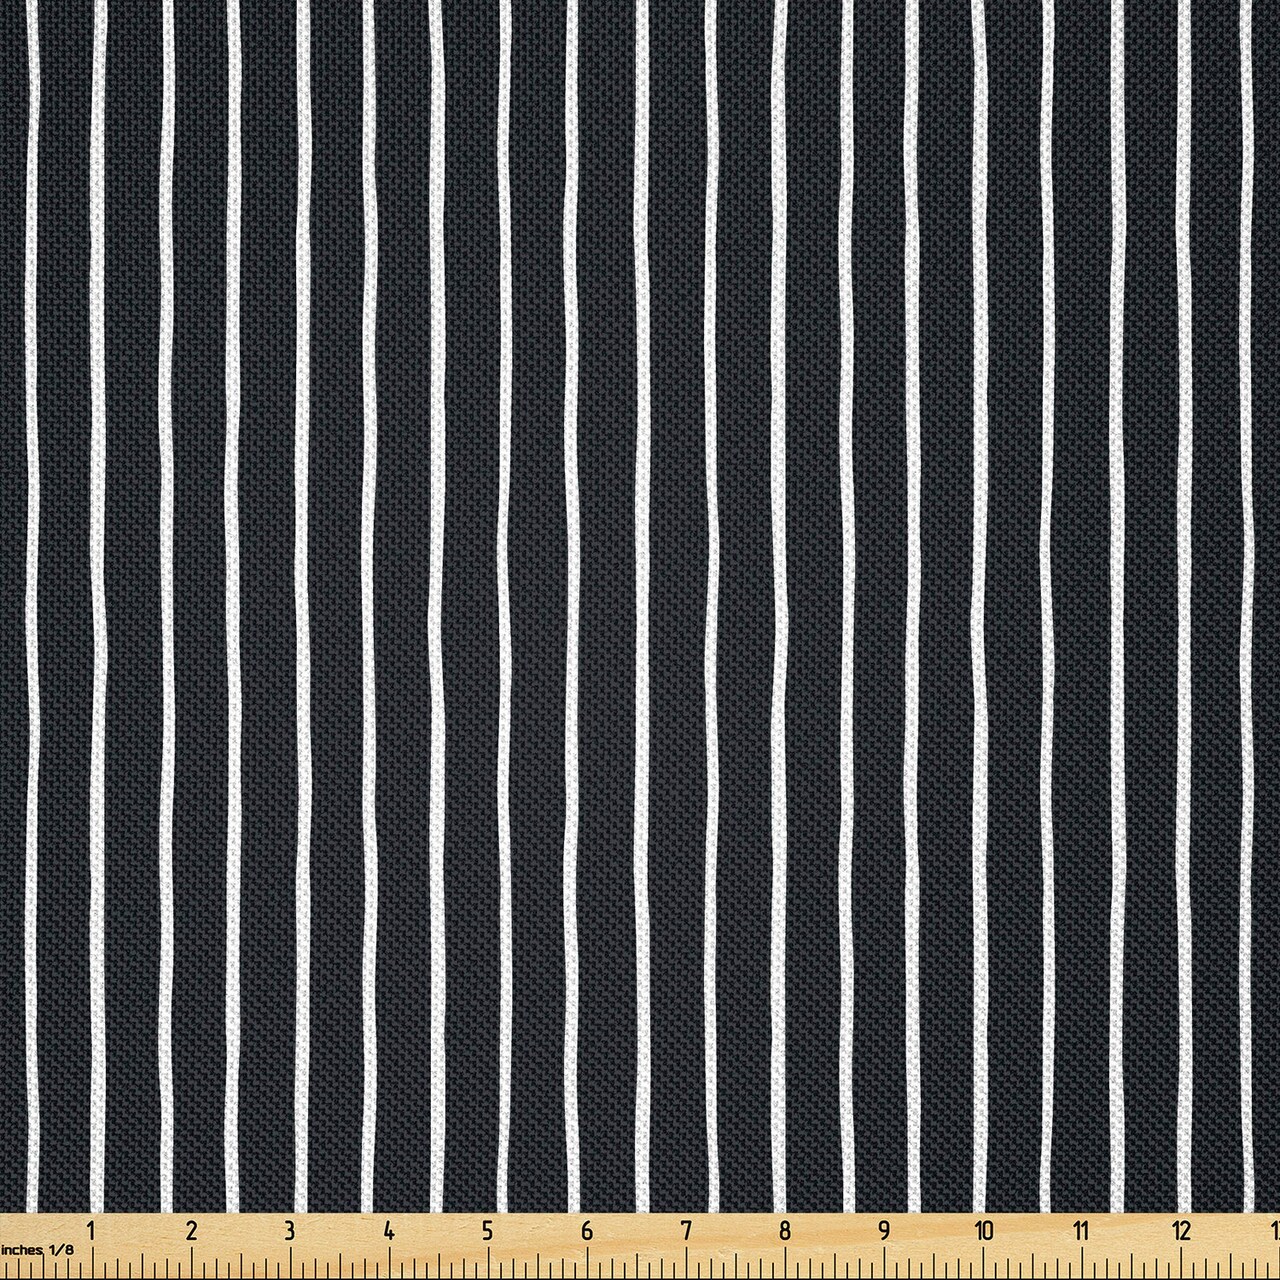 Ambesonne Pinstripe Fabric by The Yard, Monochrome Black and White Design White Thin Uneven Lines on Dark Backdrop, Decorative Satin Fabric for Home Textiles and Crafts, 3 Yards, Black White